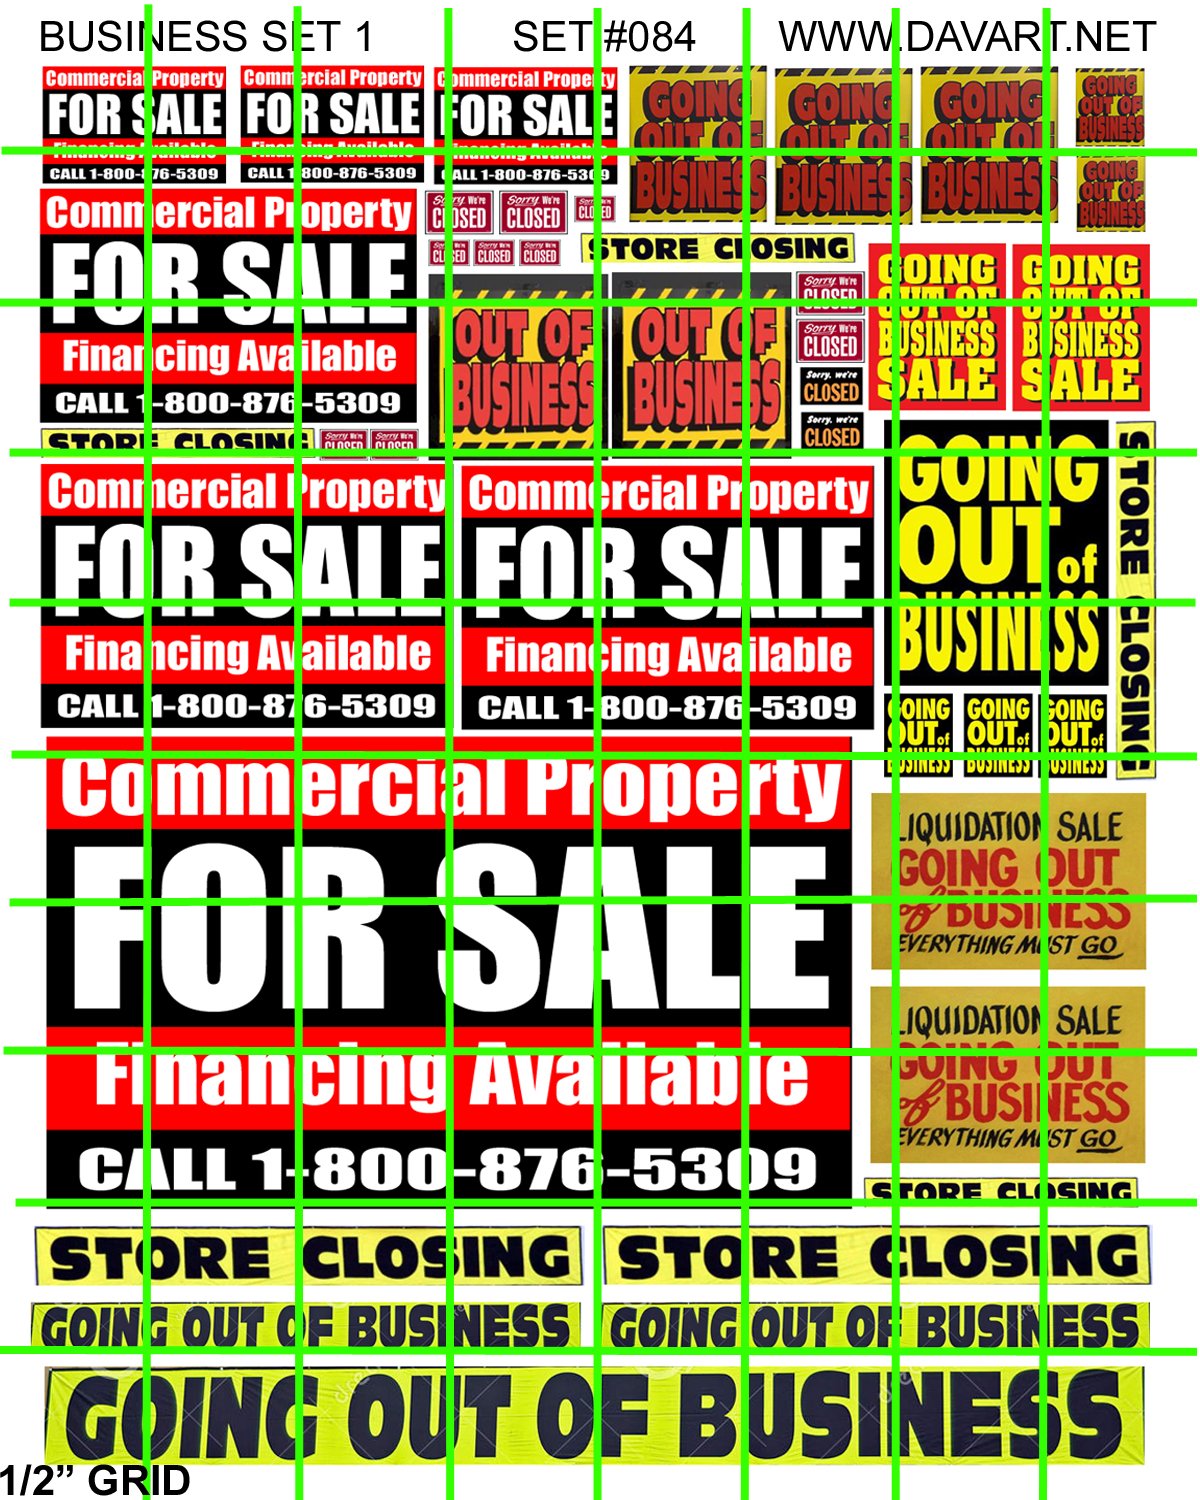 9004 - Business Set 1 FOR SALE GOING OUT OF BUSINESS STORE CLOSING